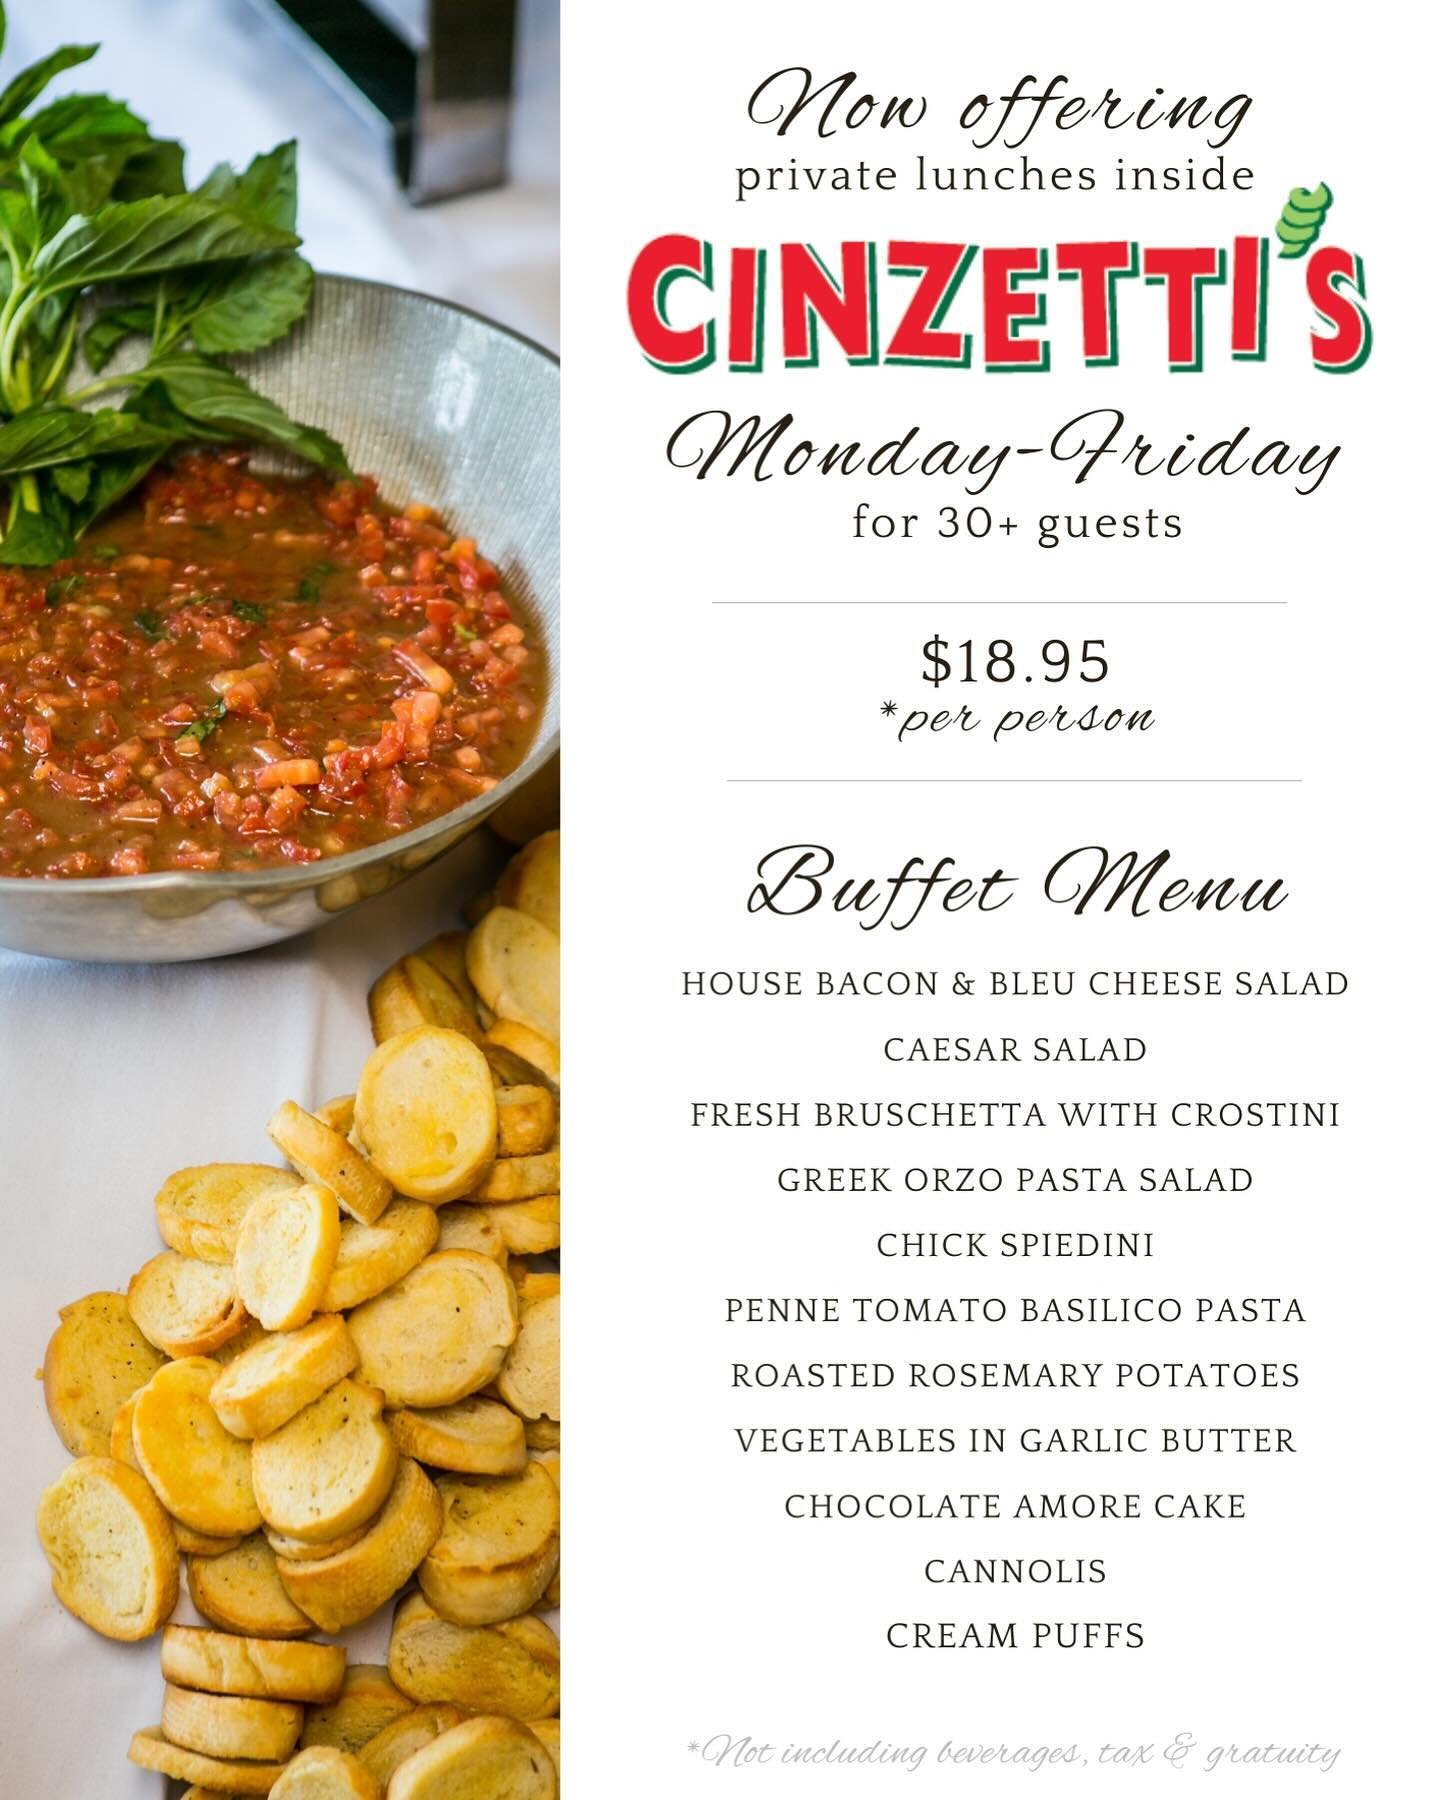 Plaza Catering is now offering private lunches for 30 or more guests. Join us for a delicious buffet menu Monday - Friday located inside Cinzetti&rsquo;s in Overland Park. Call 913-383-8800 or e-mail info@plazacatering.com to make reservations. 
.
.
